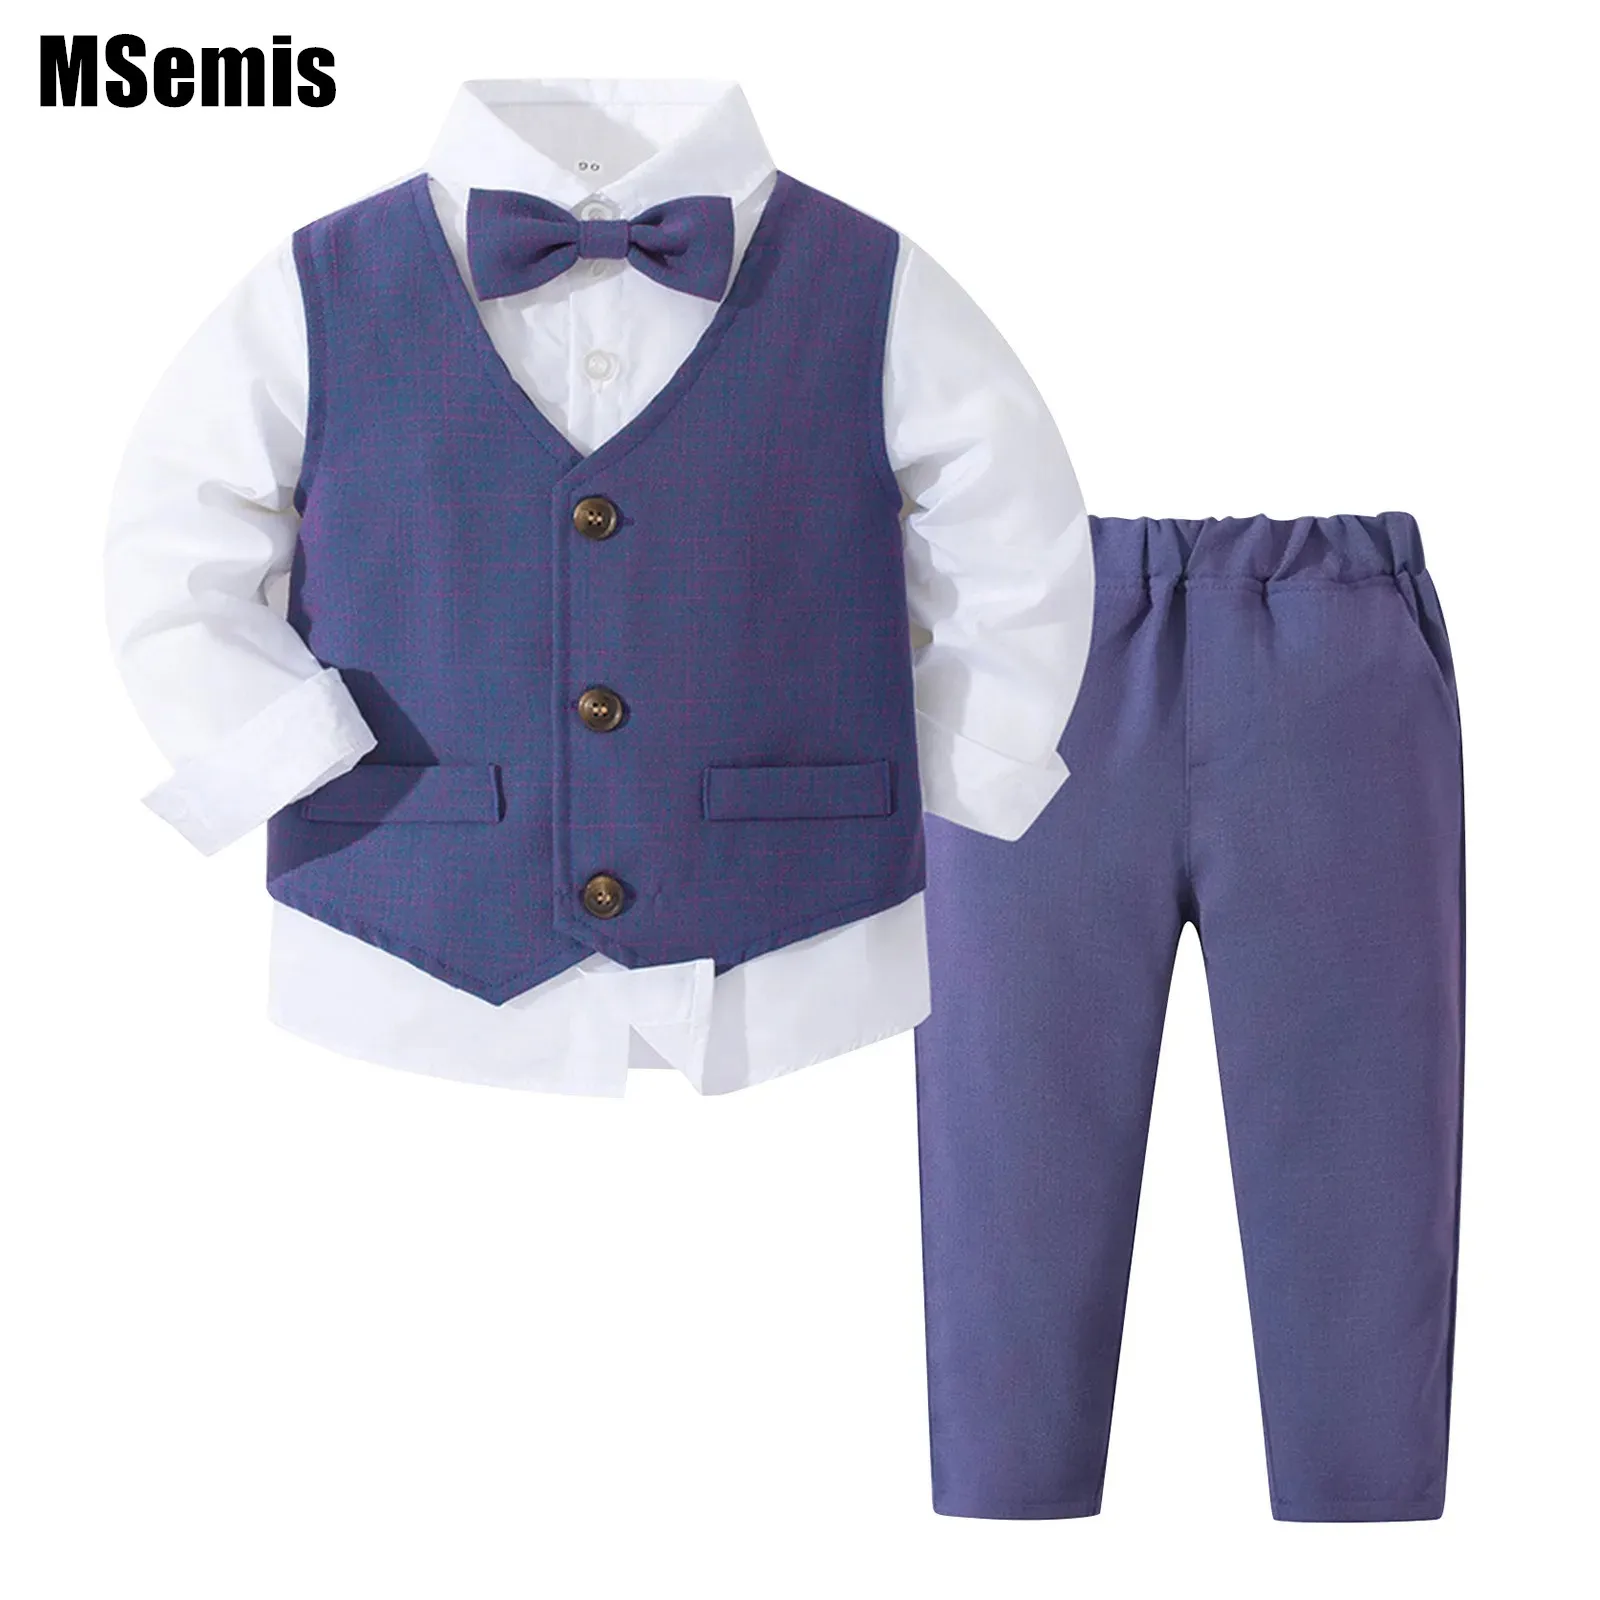 

Kids Boys Three-Piece Gentleman Outfits Long Sleeve Shirt with Bowtie Pointed Hem Vest And Elastic Waist Pants Suit